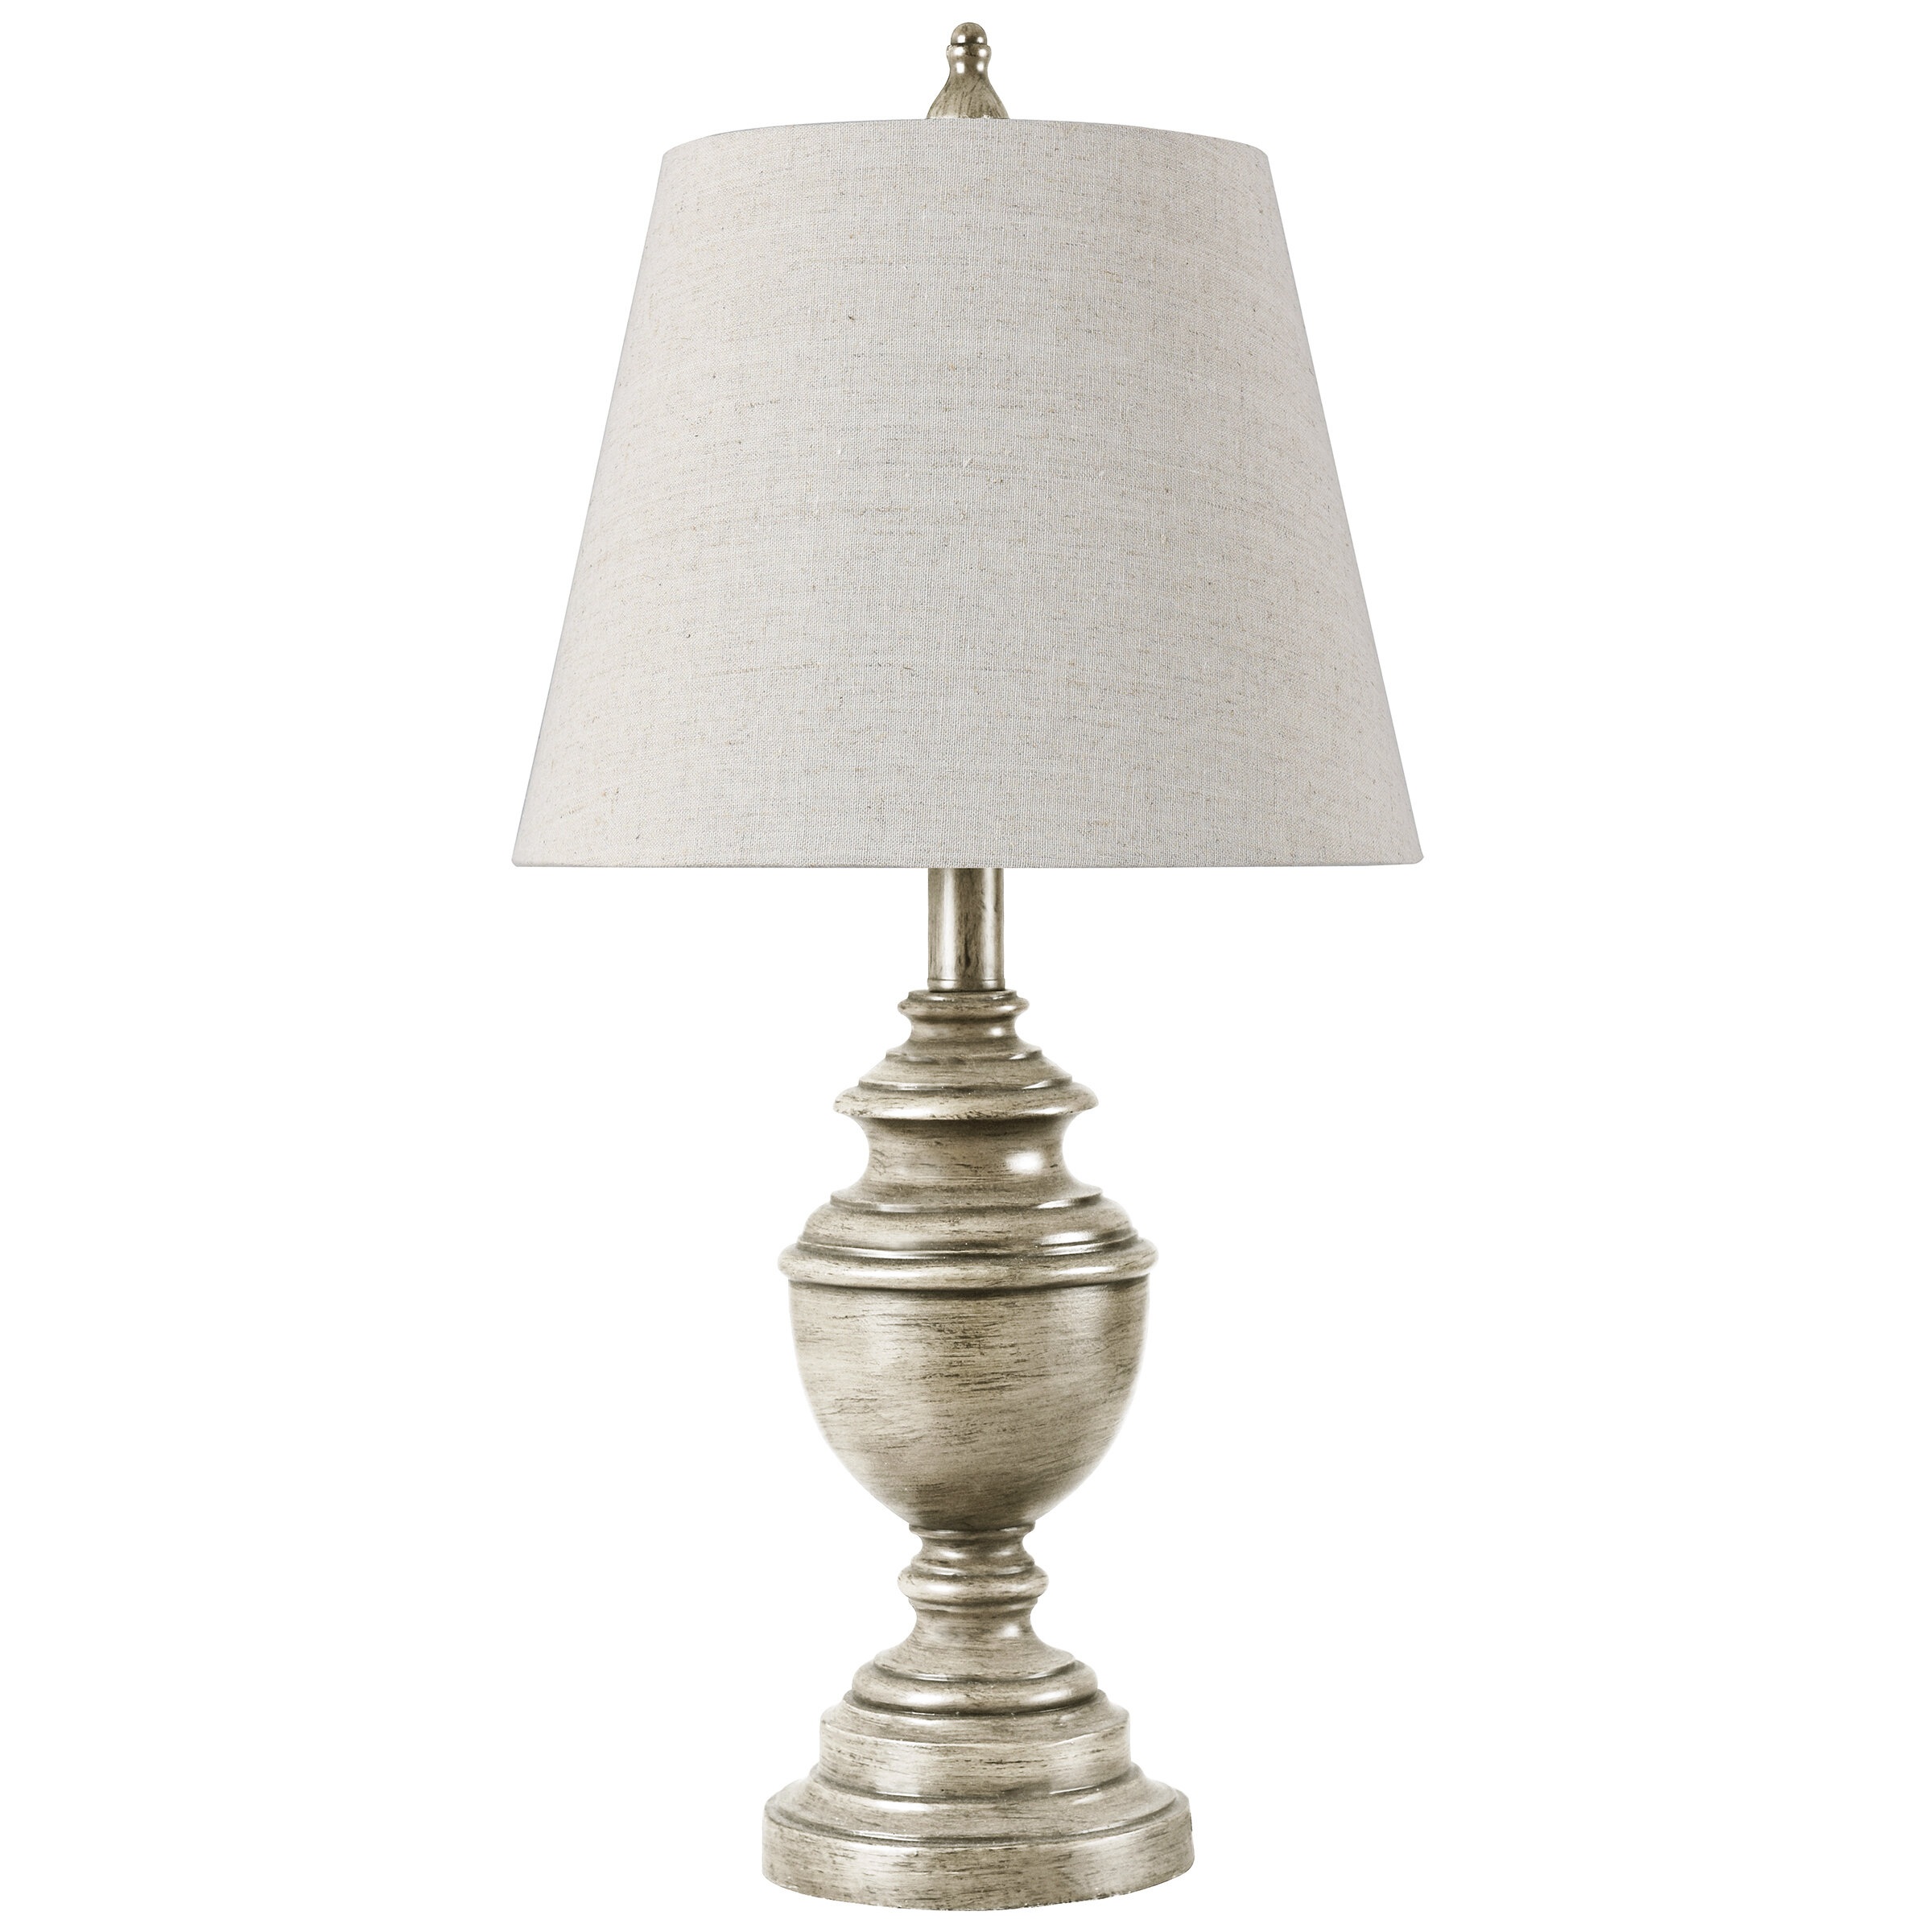 Wayfair | Fabric Shade Table Lamps You'll Love in 2022